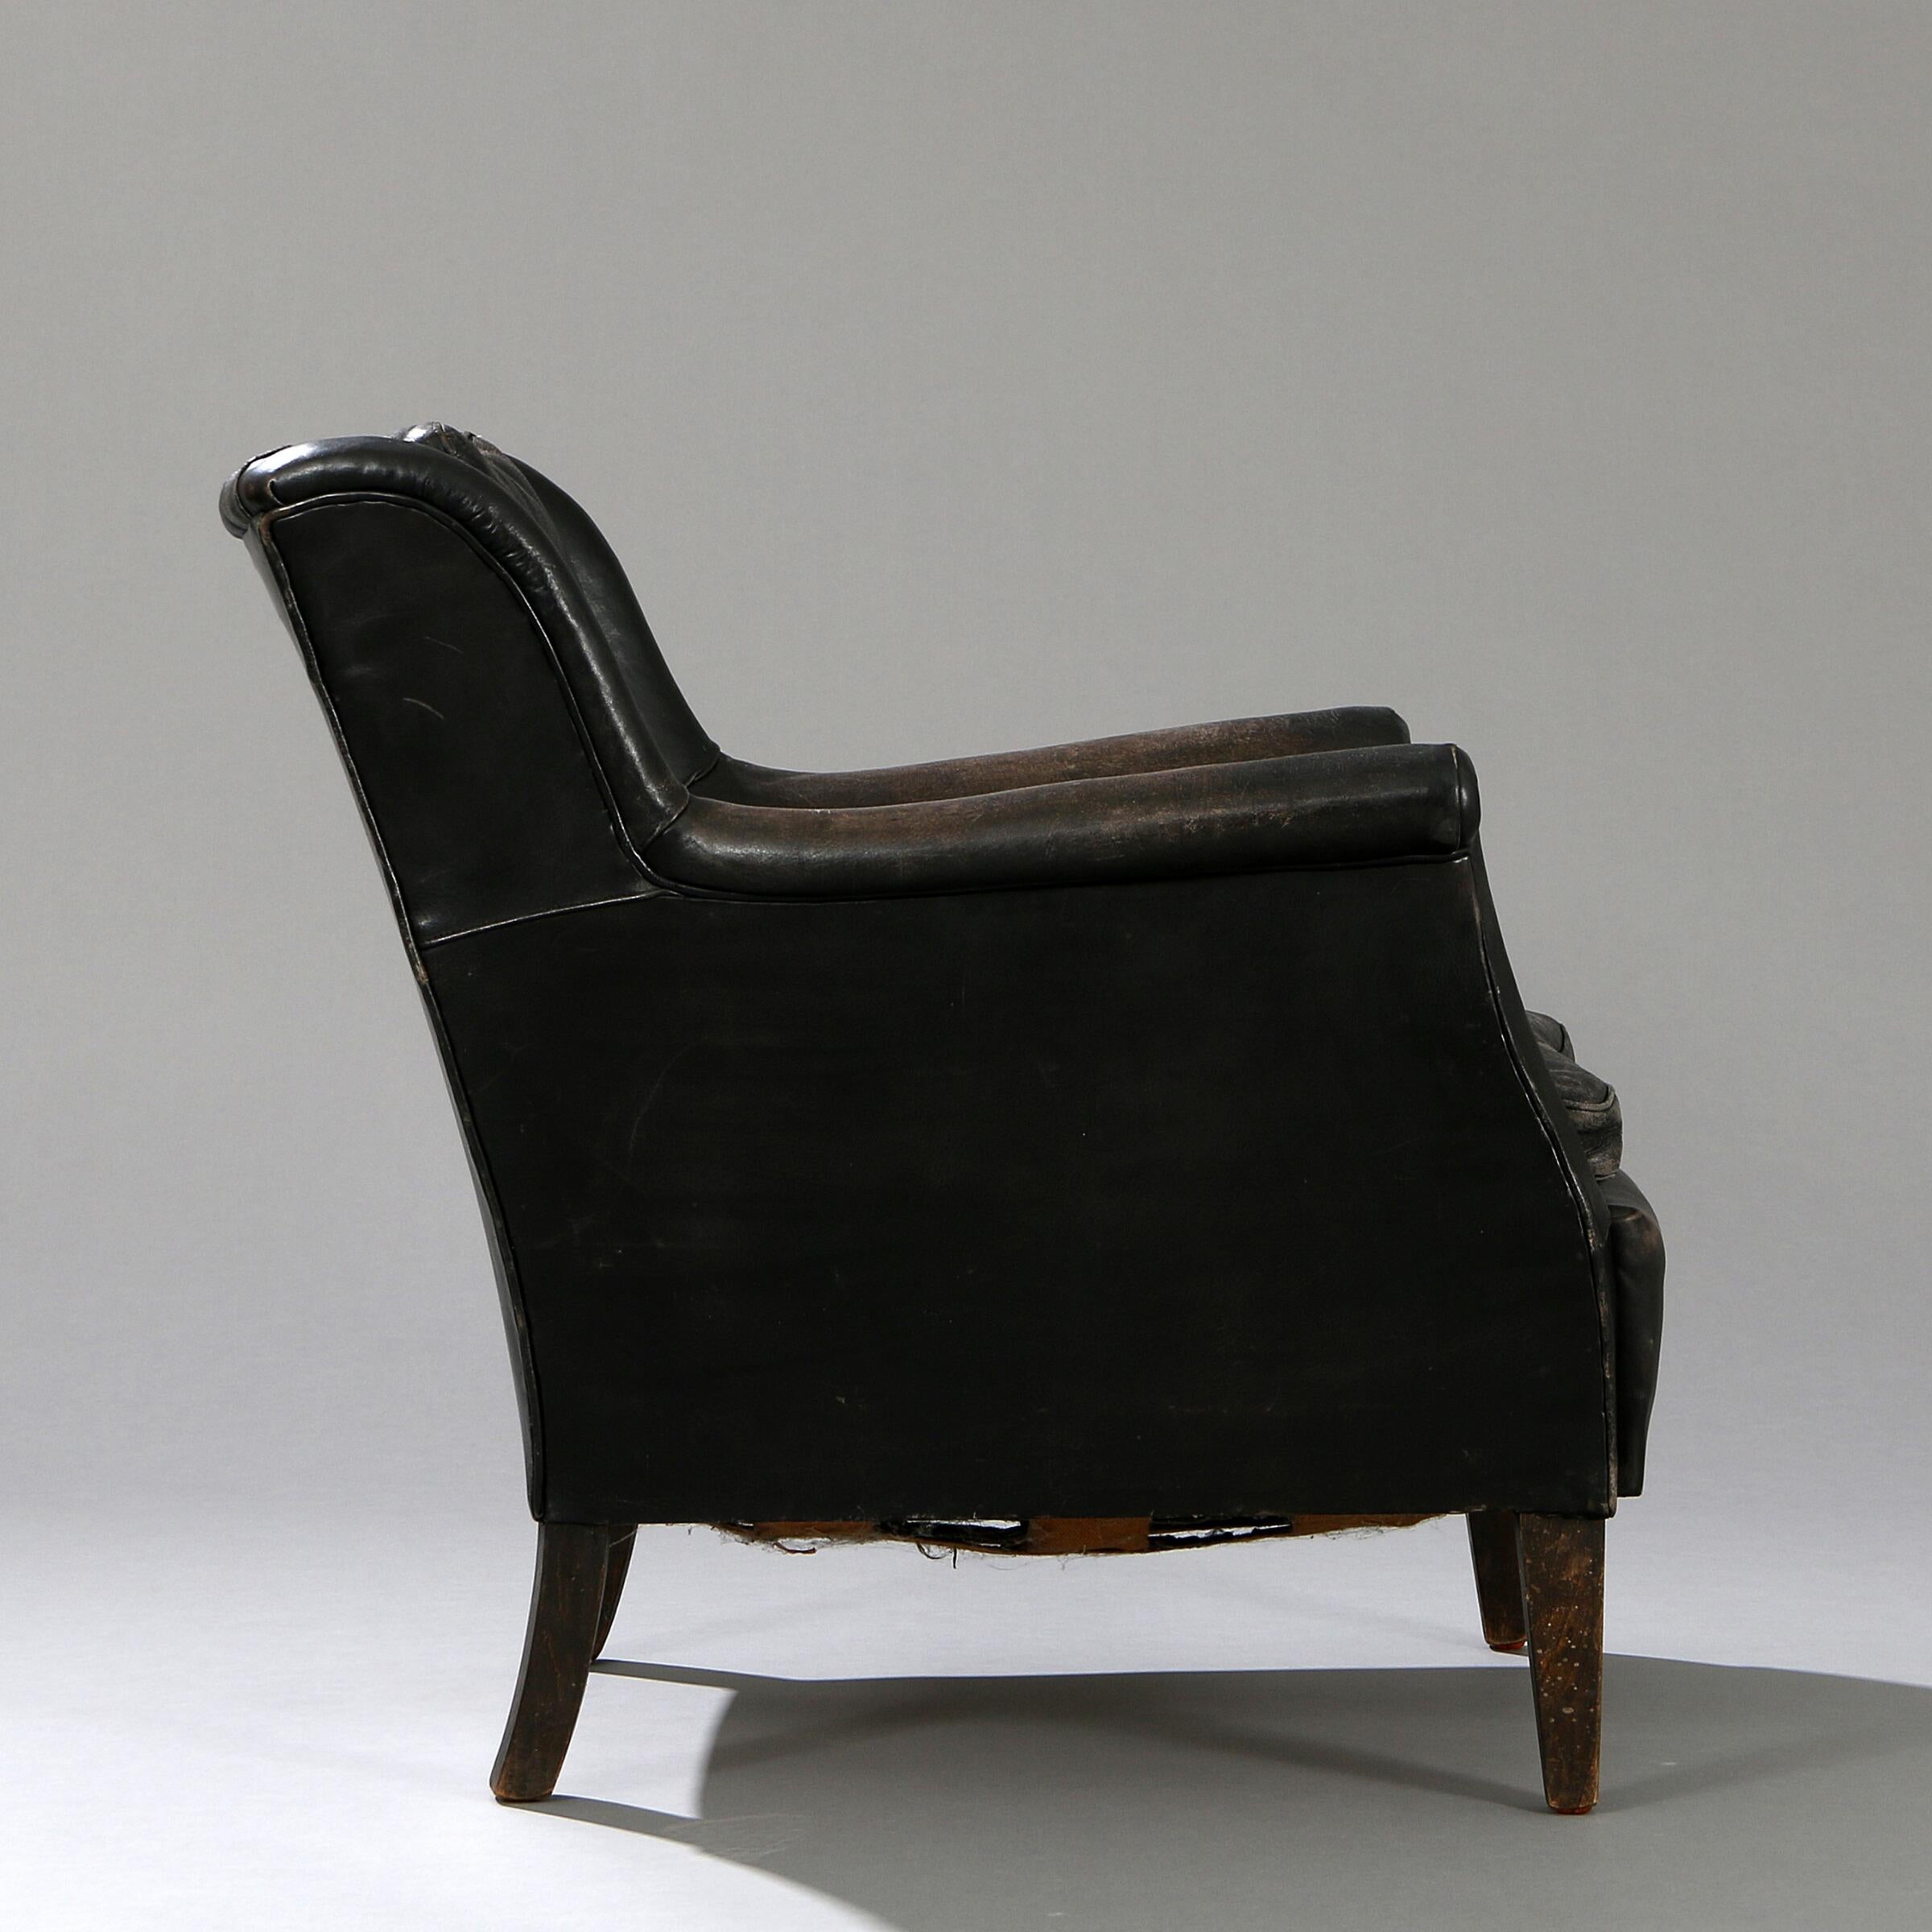 Scandinavian Modern Black Leather Sofa and Armchair Attributed to Frits Henningsen, C1950s For Sale